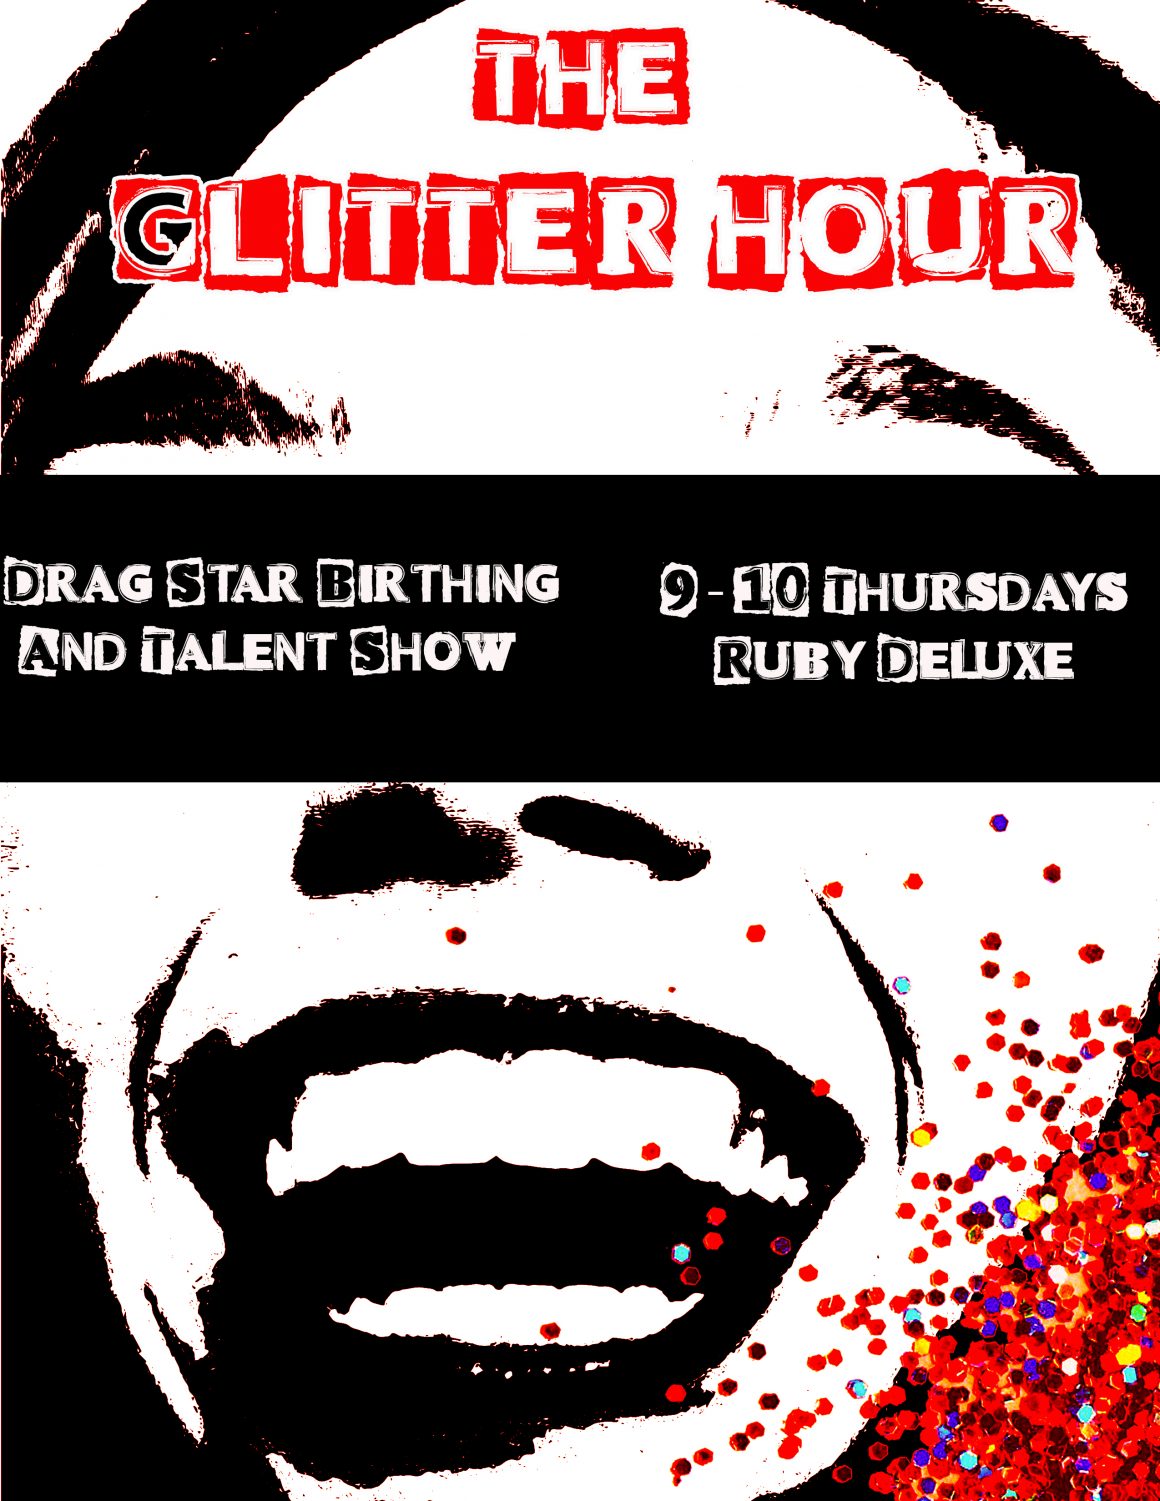 Poster for the Glitter Hour displaying a smiling, distorted face bedazzled with red glitter. Image caption reads "Drag Star Birthing and Talent Show, 9 to 10 Thursdays, Ruby Deluxe."